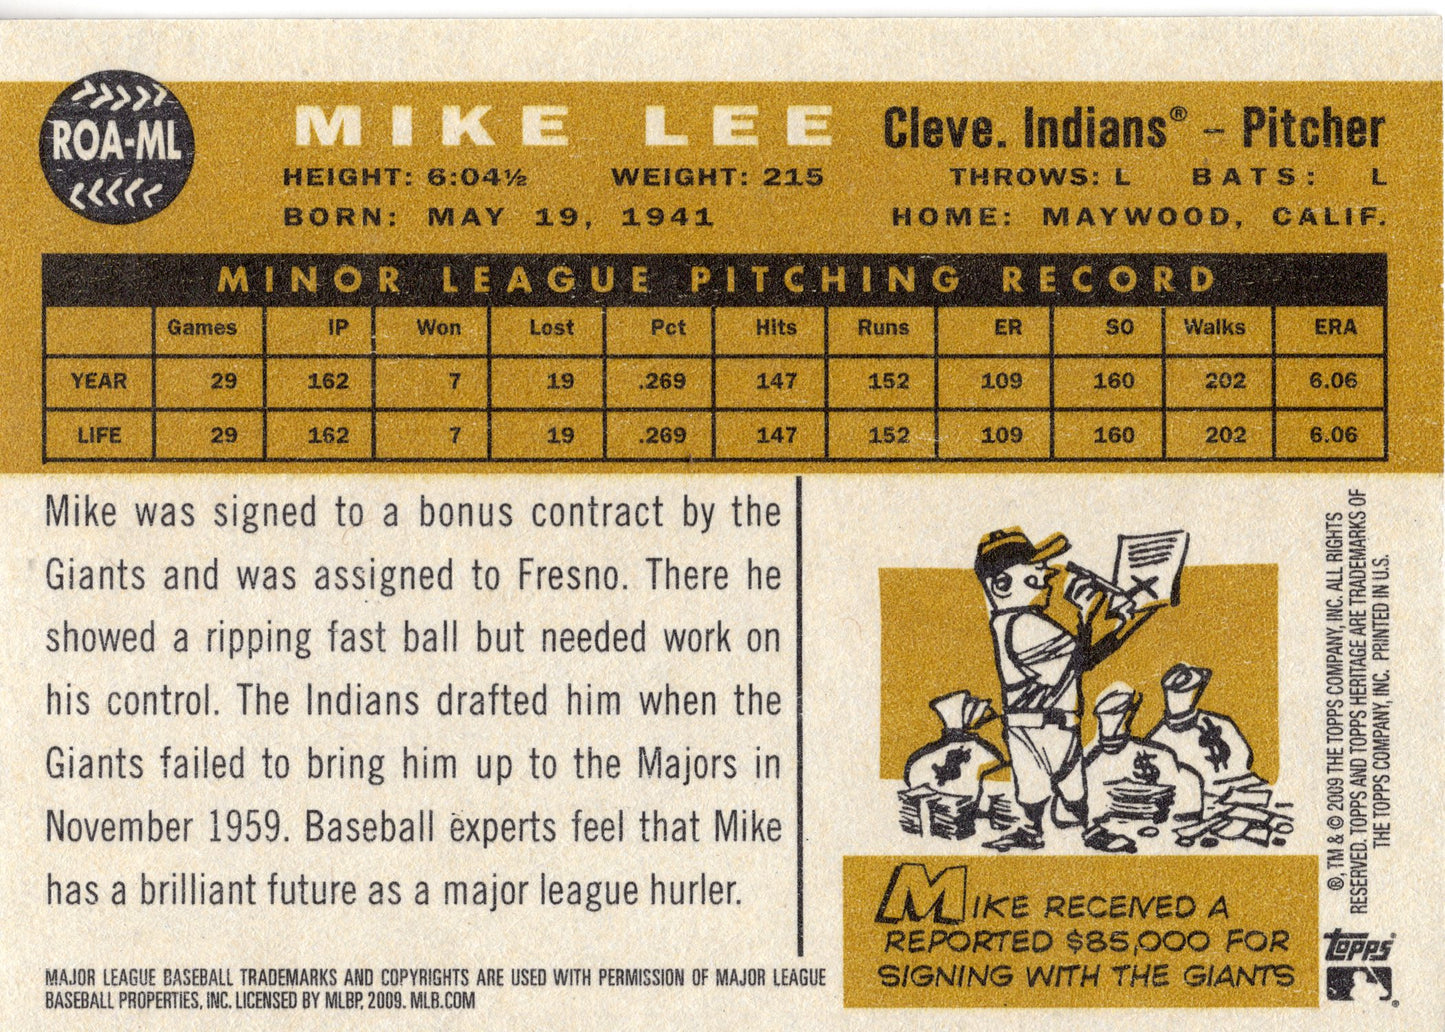 2009 Topps Heritage Blue Ink Autograph Mike Lee #ROA-ML